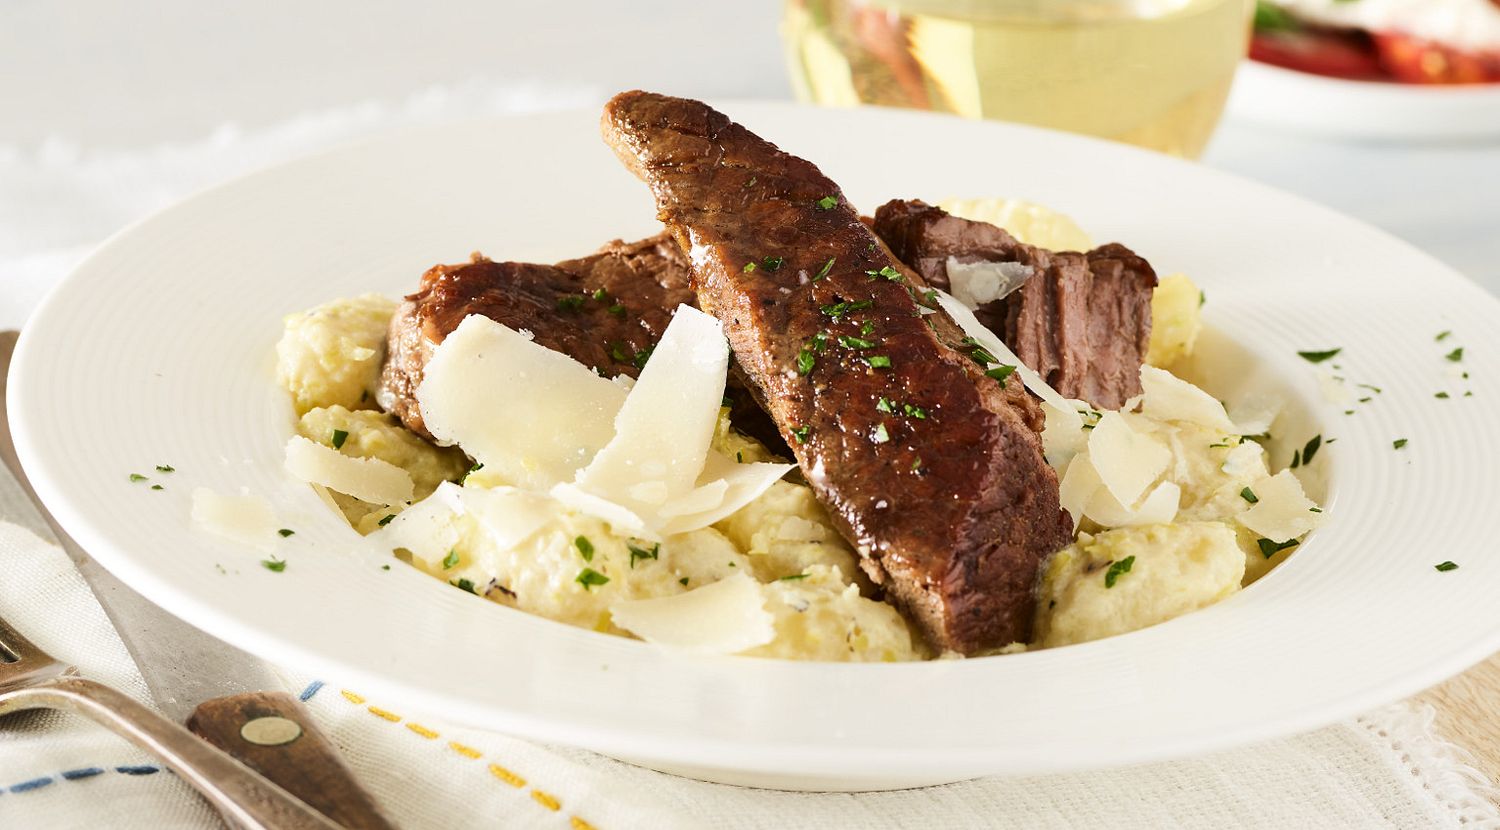 Braised Beef Short Ribs and Ricotta Gnocchi with Charred Pepper Cream Sauce